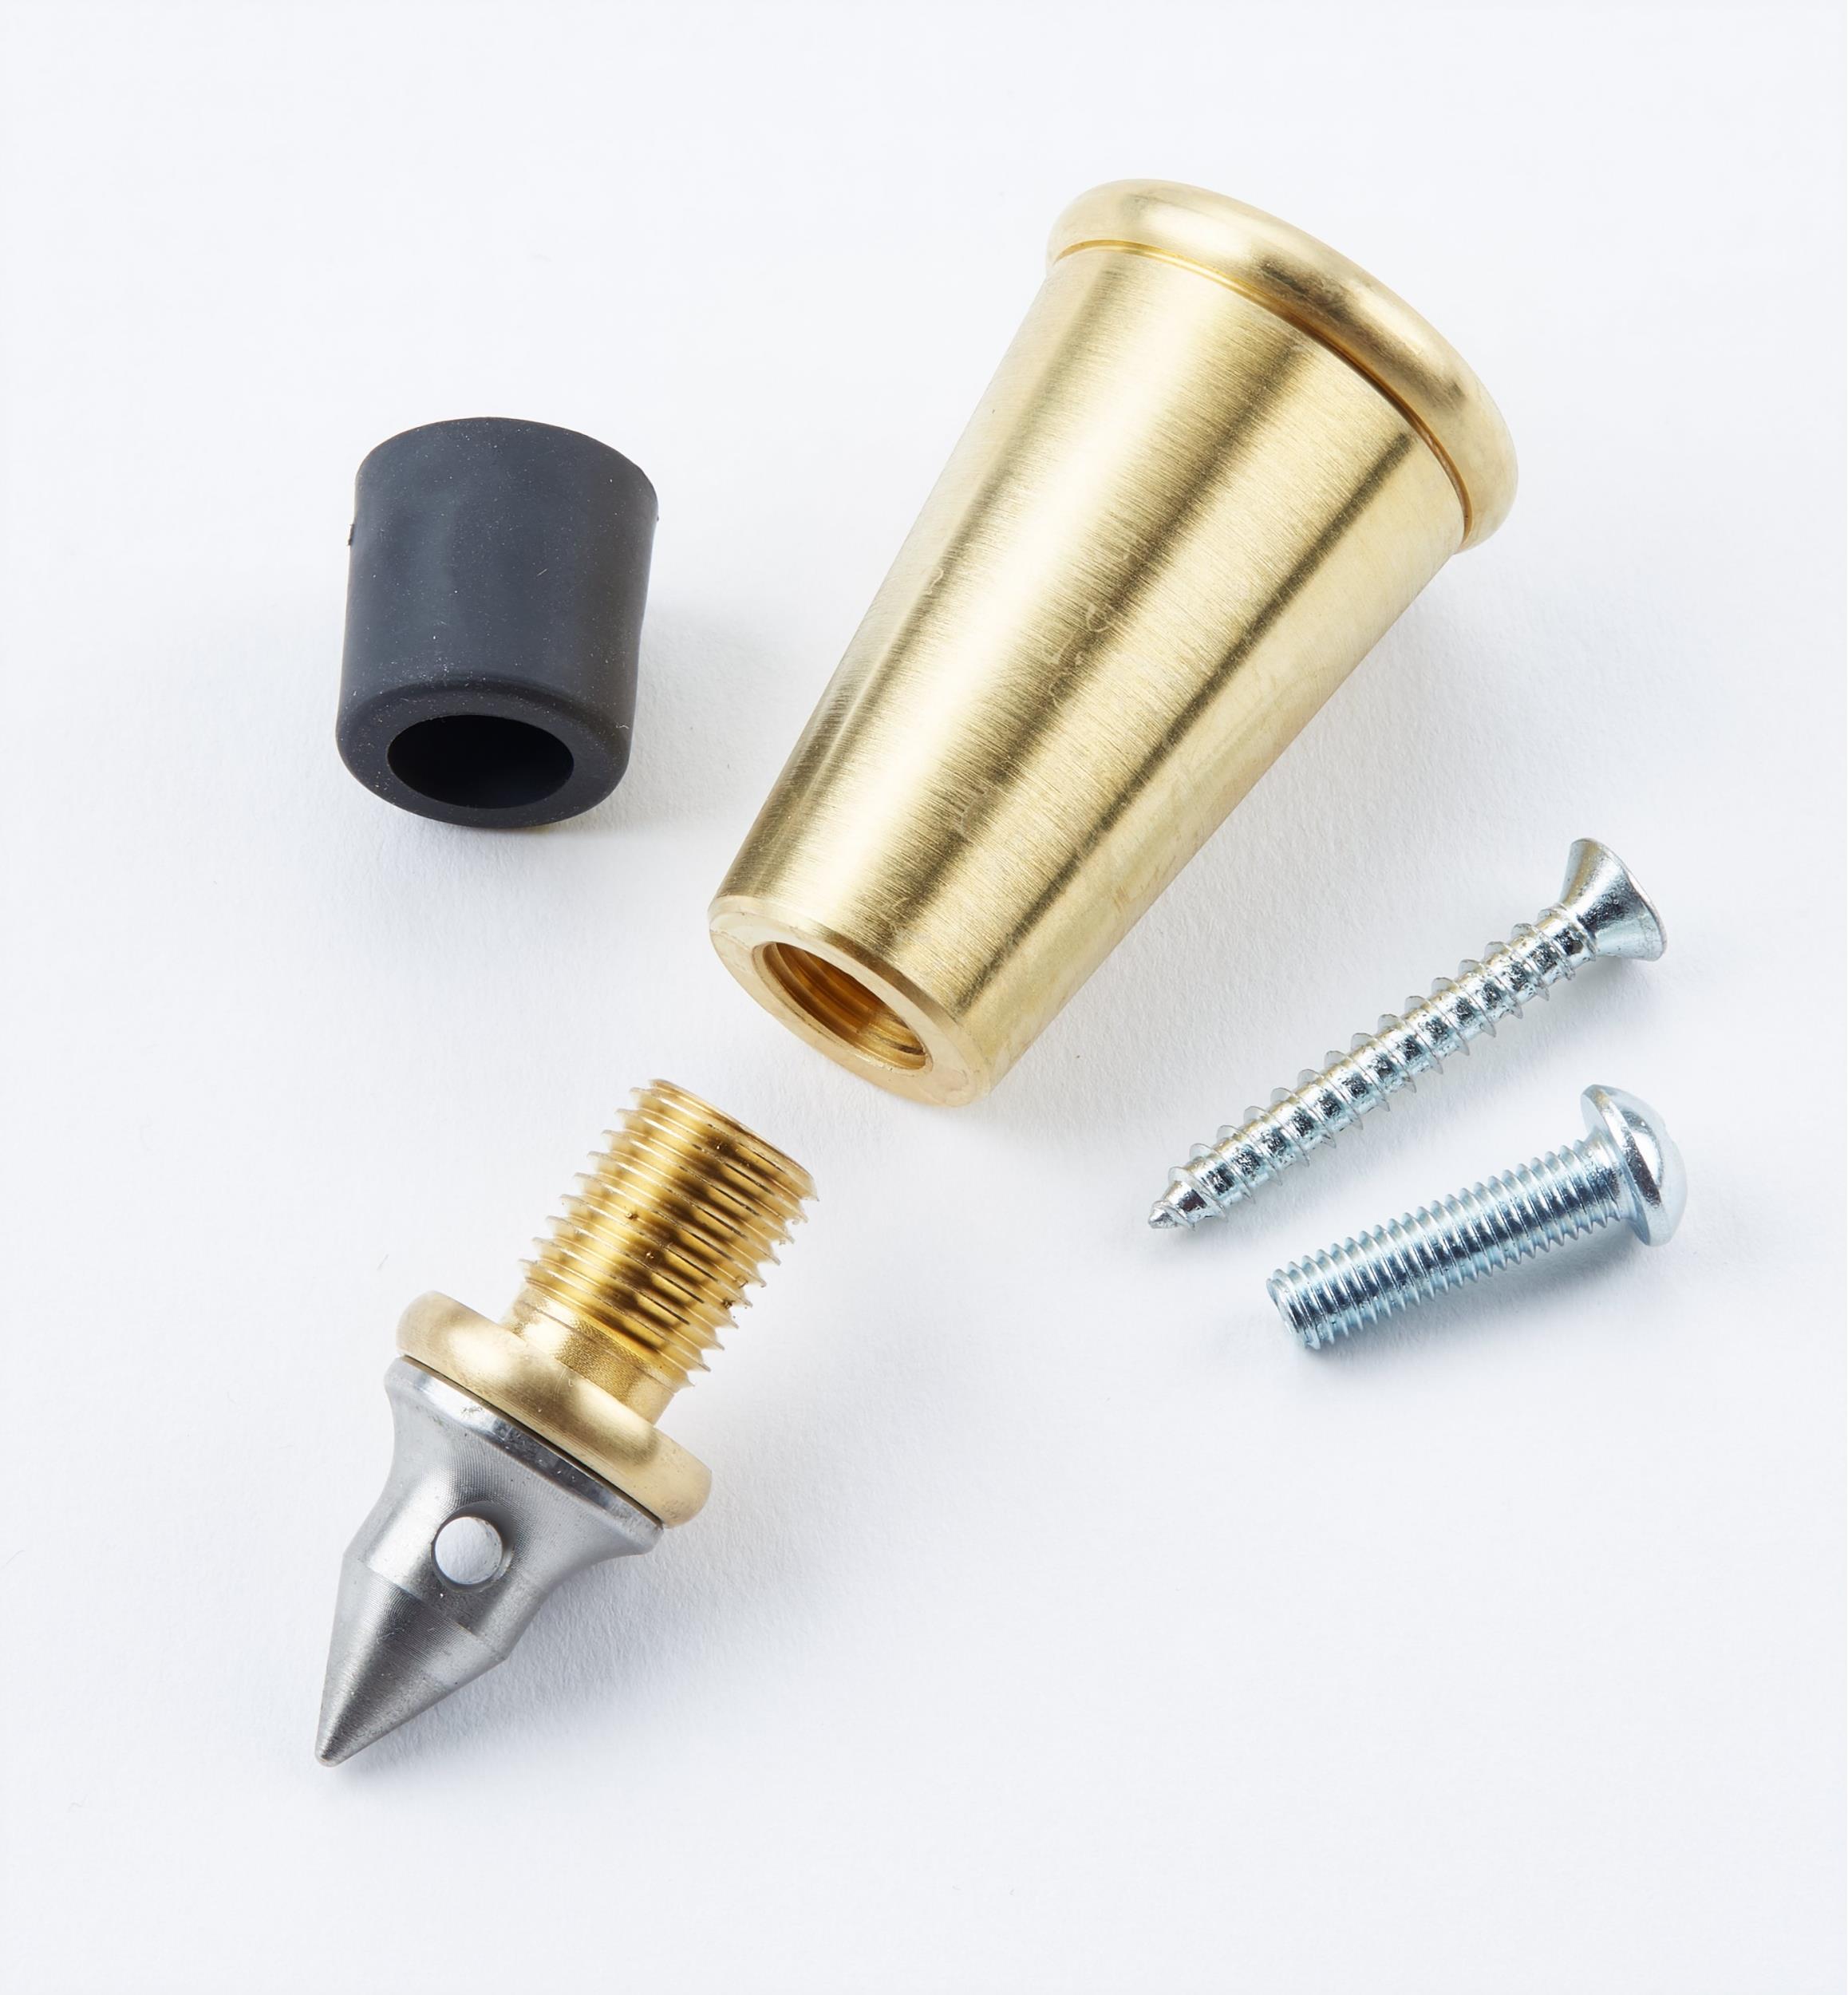 Rubber/Brass Cane Tip - Lee Valley Tools